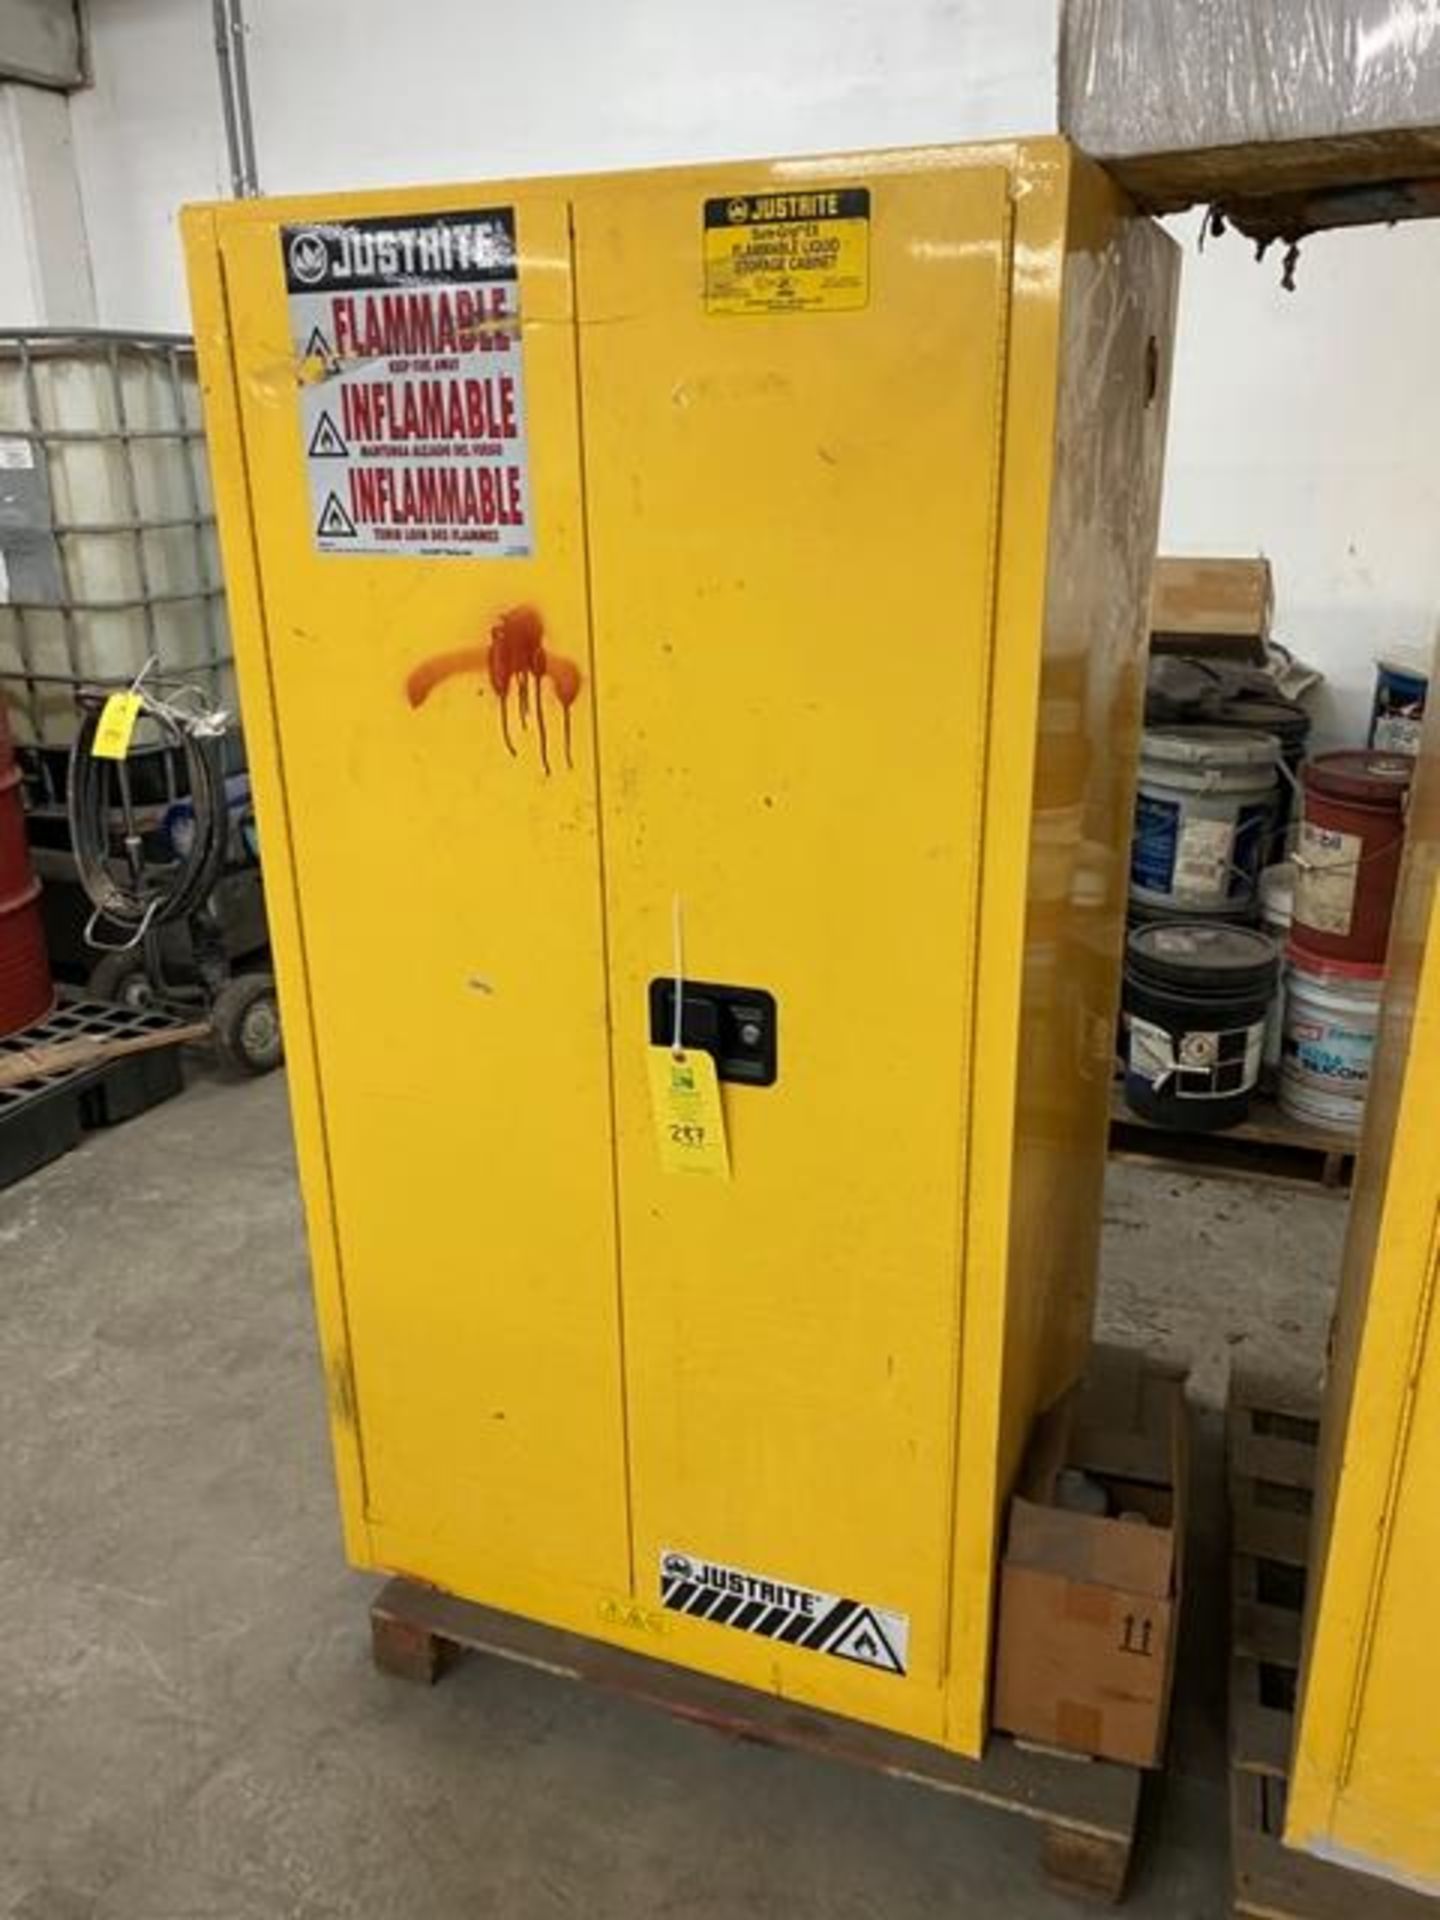 Justrite Flame Proof Cabinet Rigging Price $50